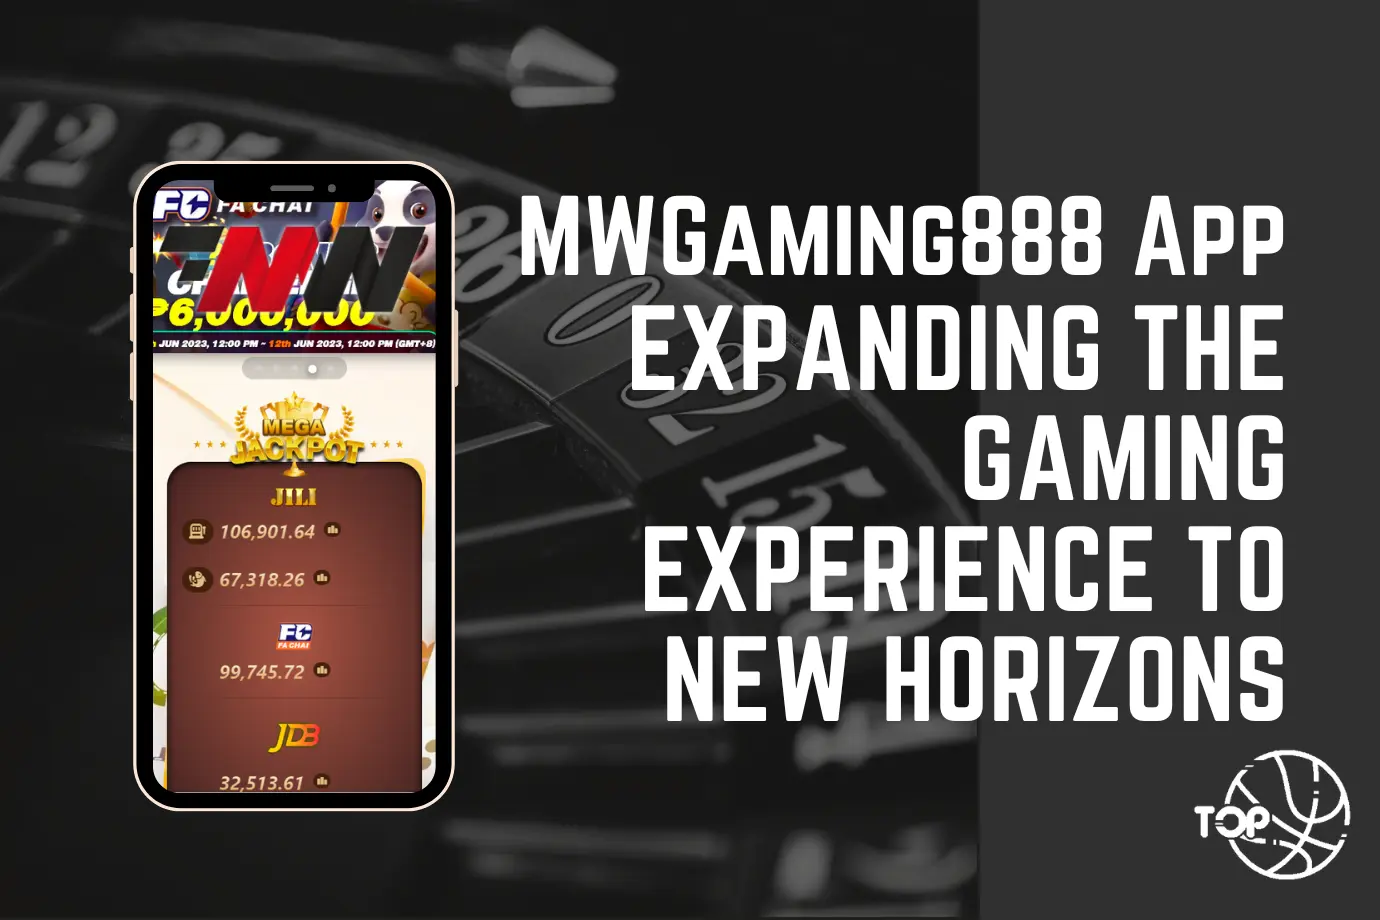 MWGaming888 App: Expanding the Gaming Experience to New Horizons